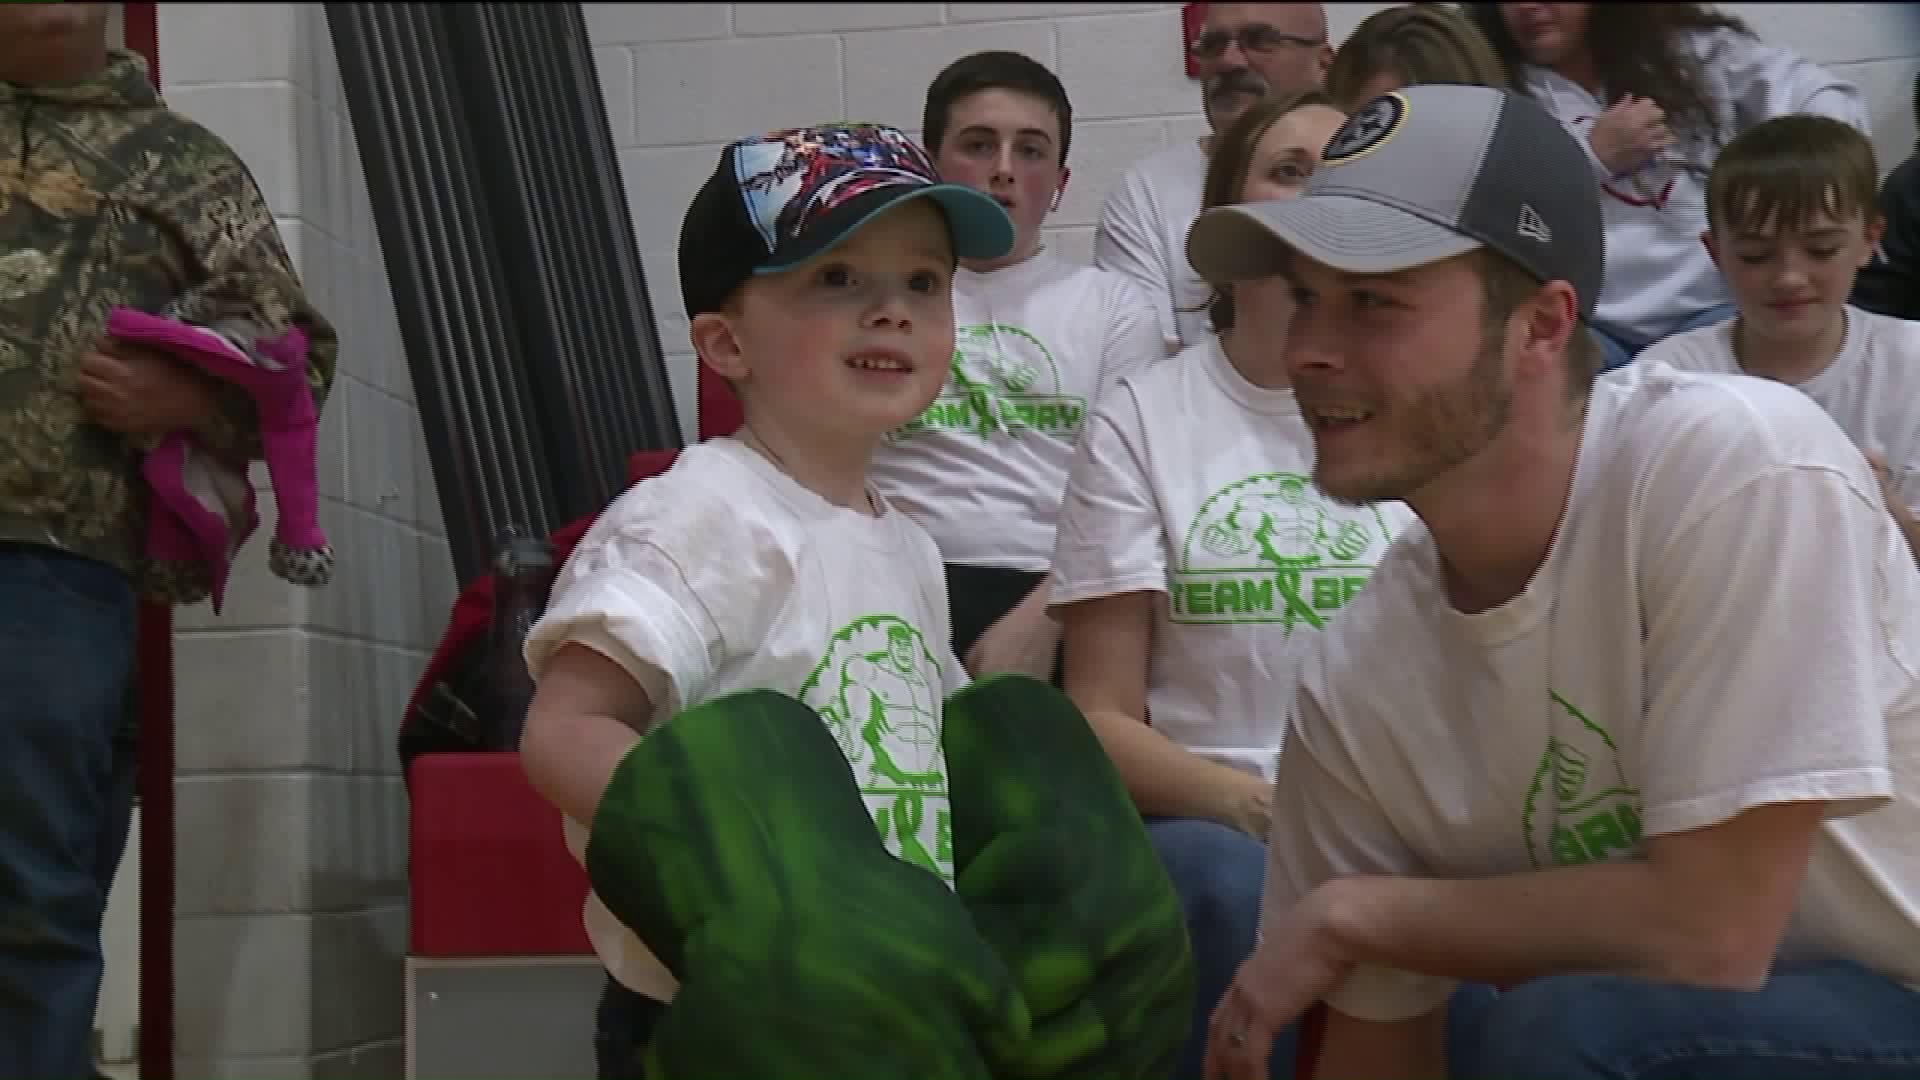 Game of Hoops to Help Sick Child in Susquehanna County